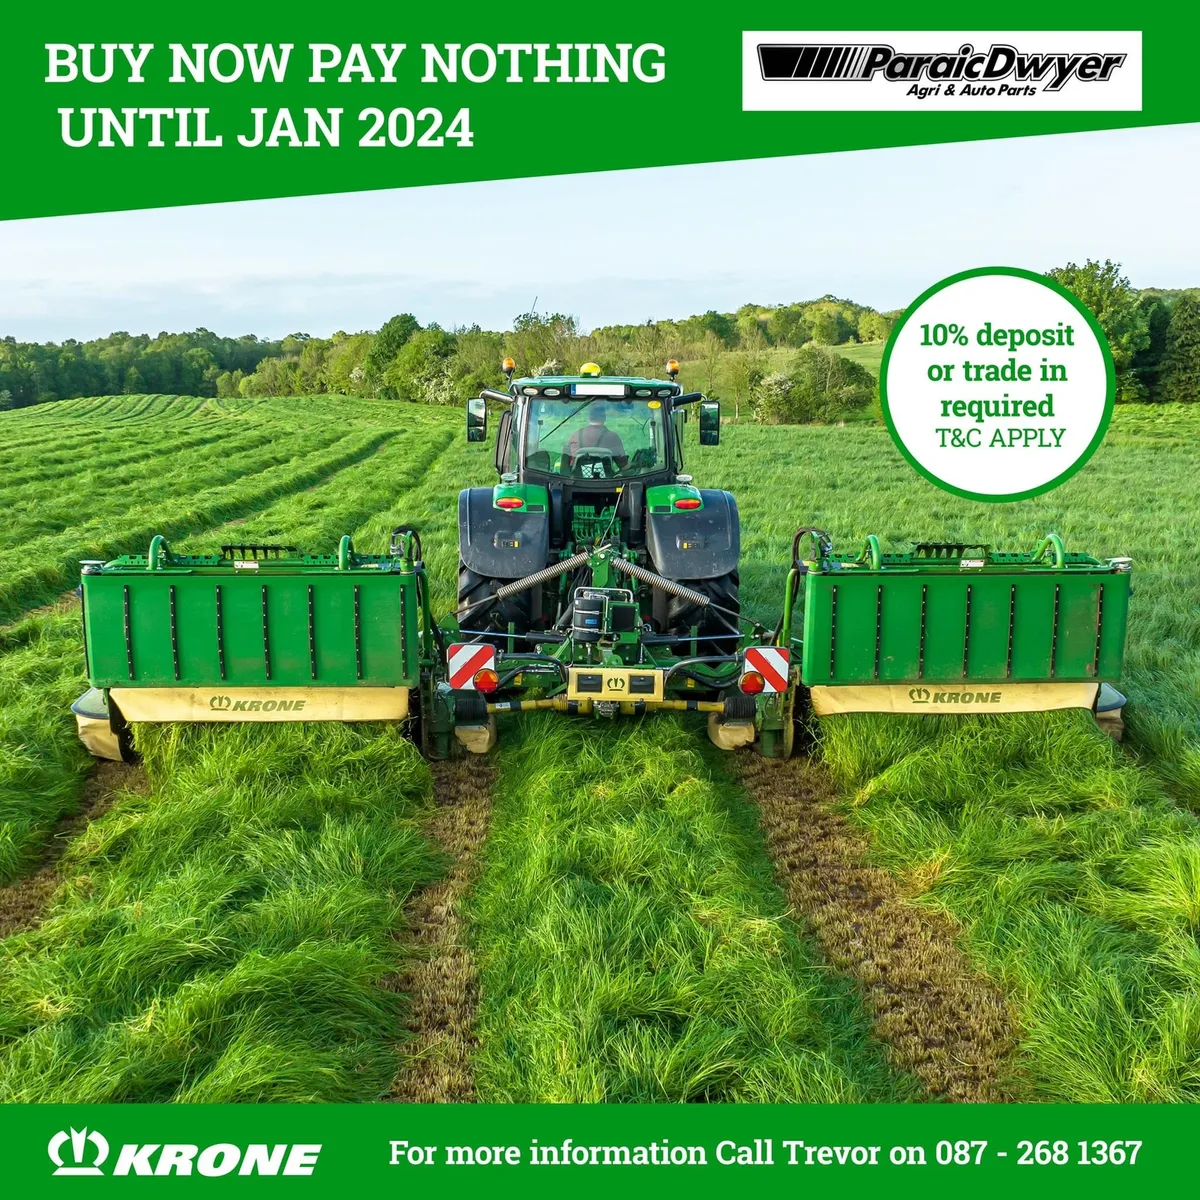 Krone Mowers - Pay nothing until January 24